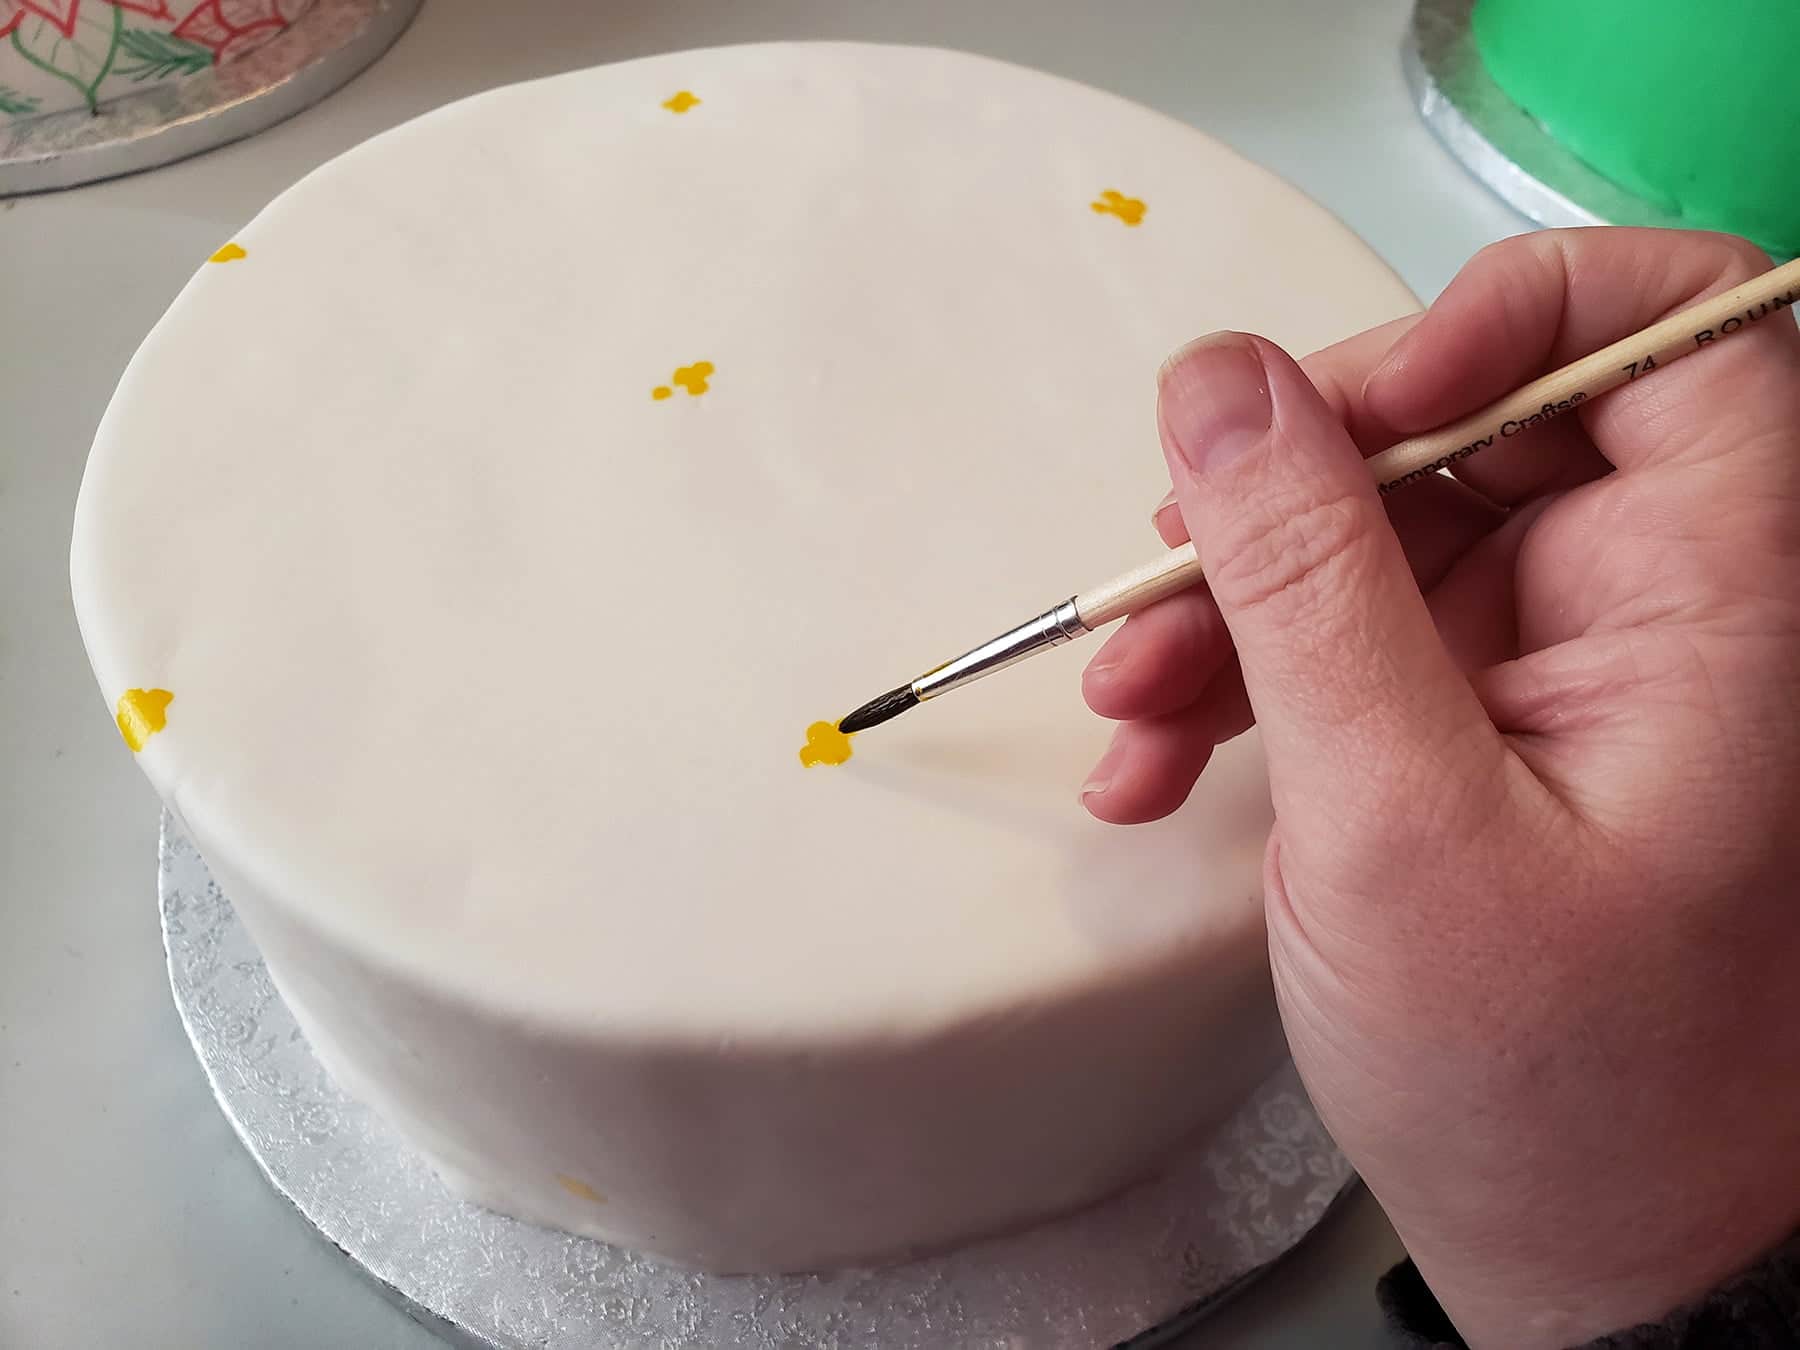 A hand uses a paintbrush to paint small dots of yellow food colouring on a smooth white round cake.